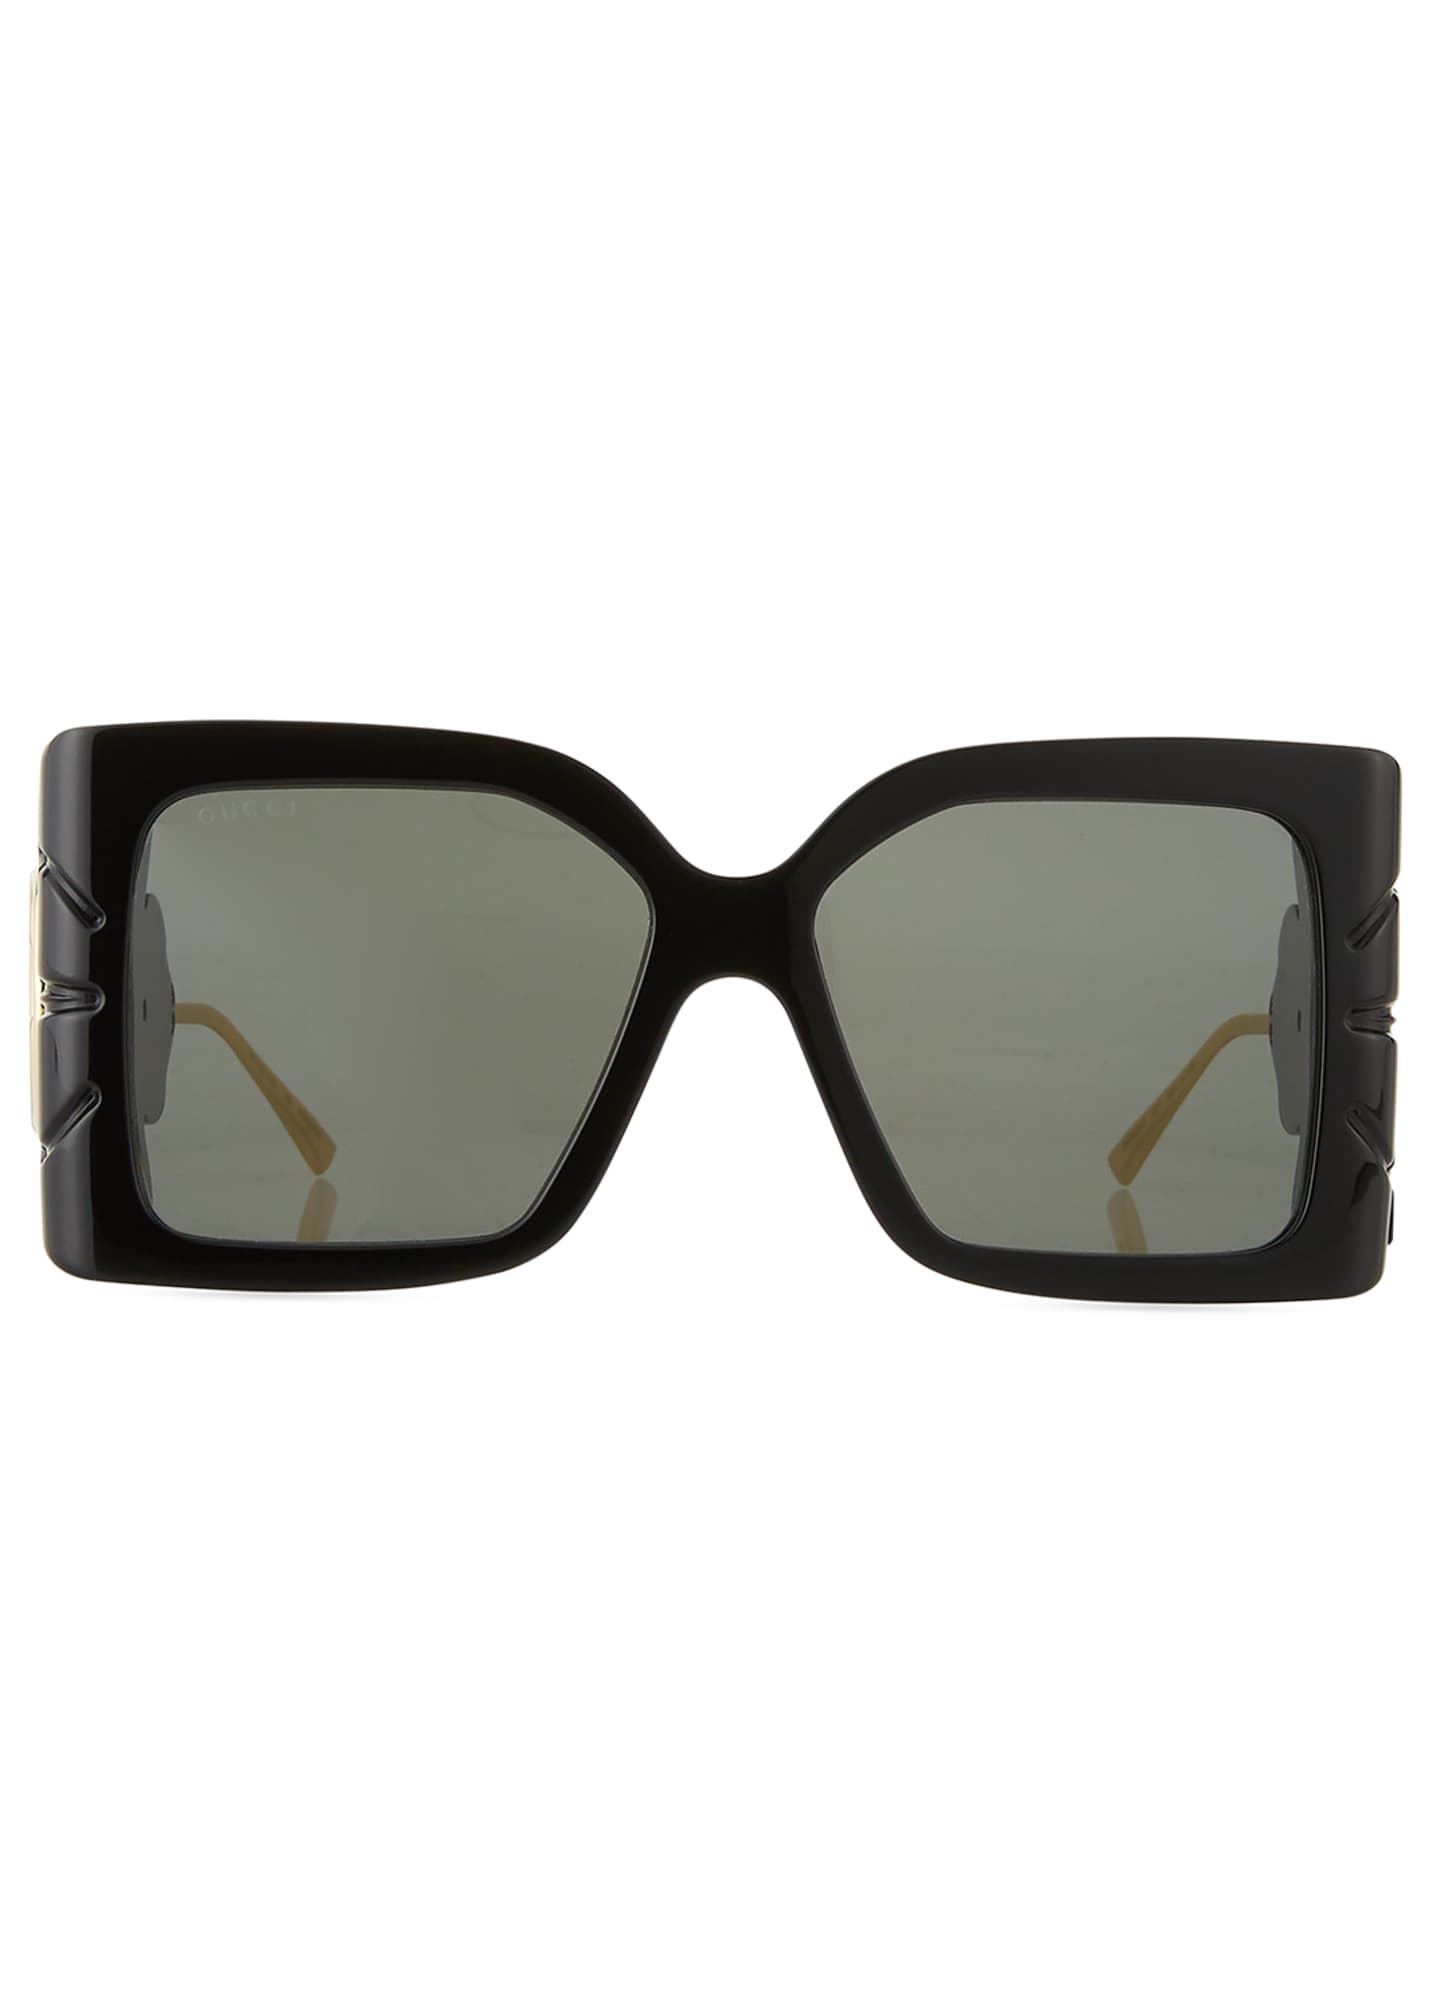 Gucci Square Acetate Sunglasses W Oversized Leaf And Gg Temples Bergdorf Goodman